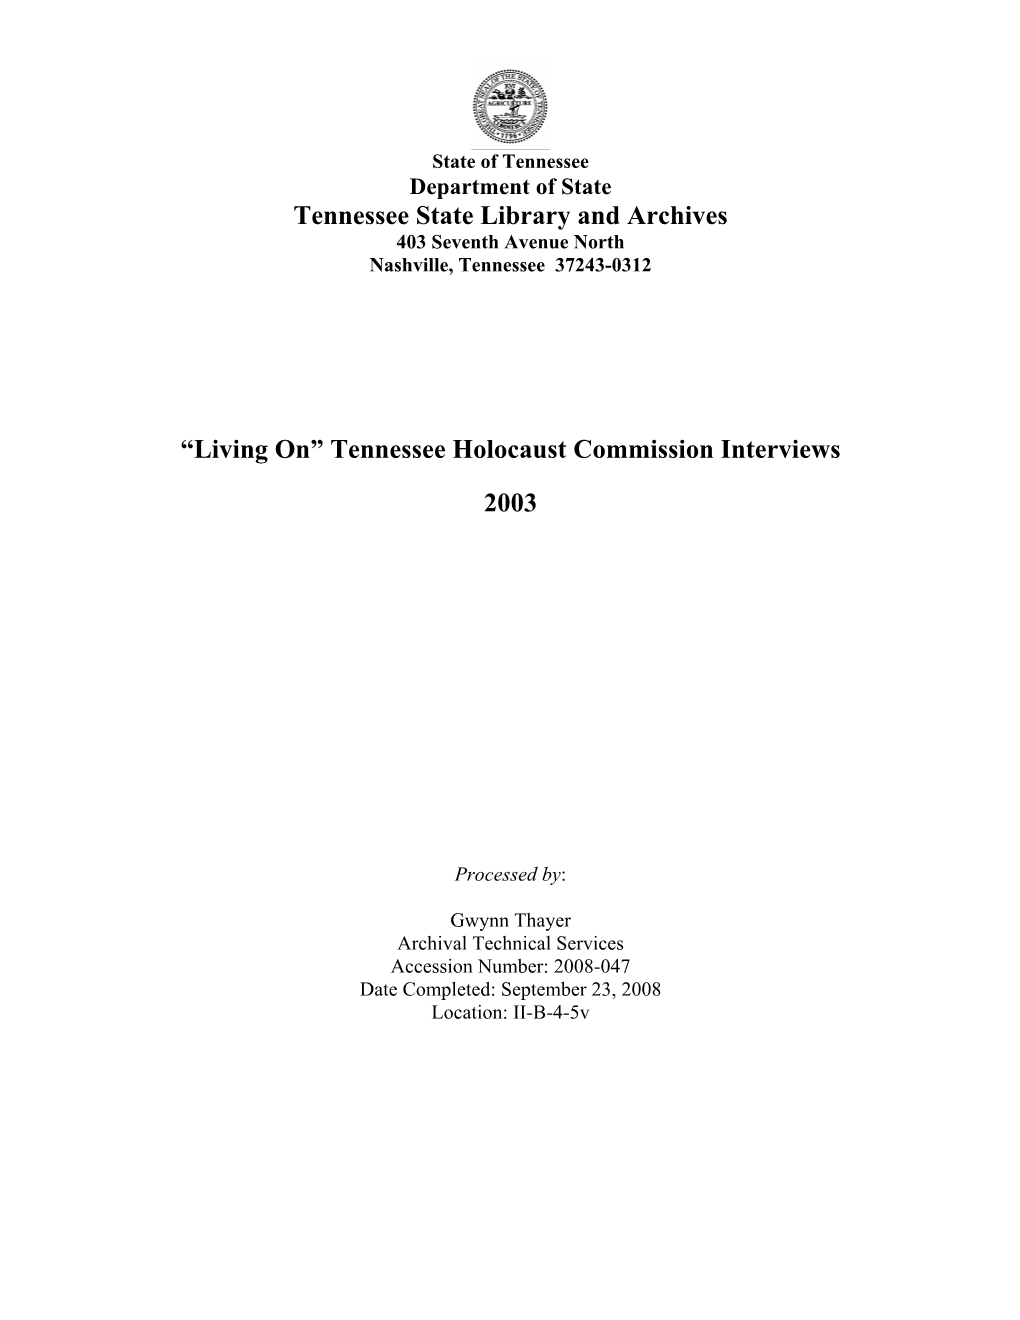 Tennessee Holocaust Commission Interviews 2003